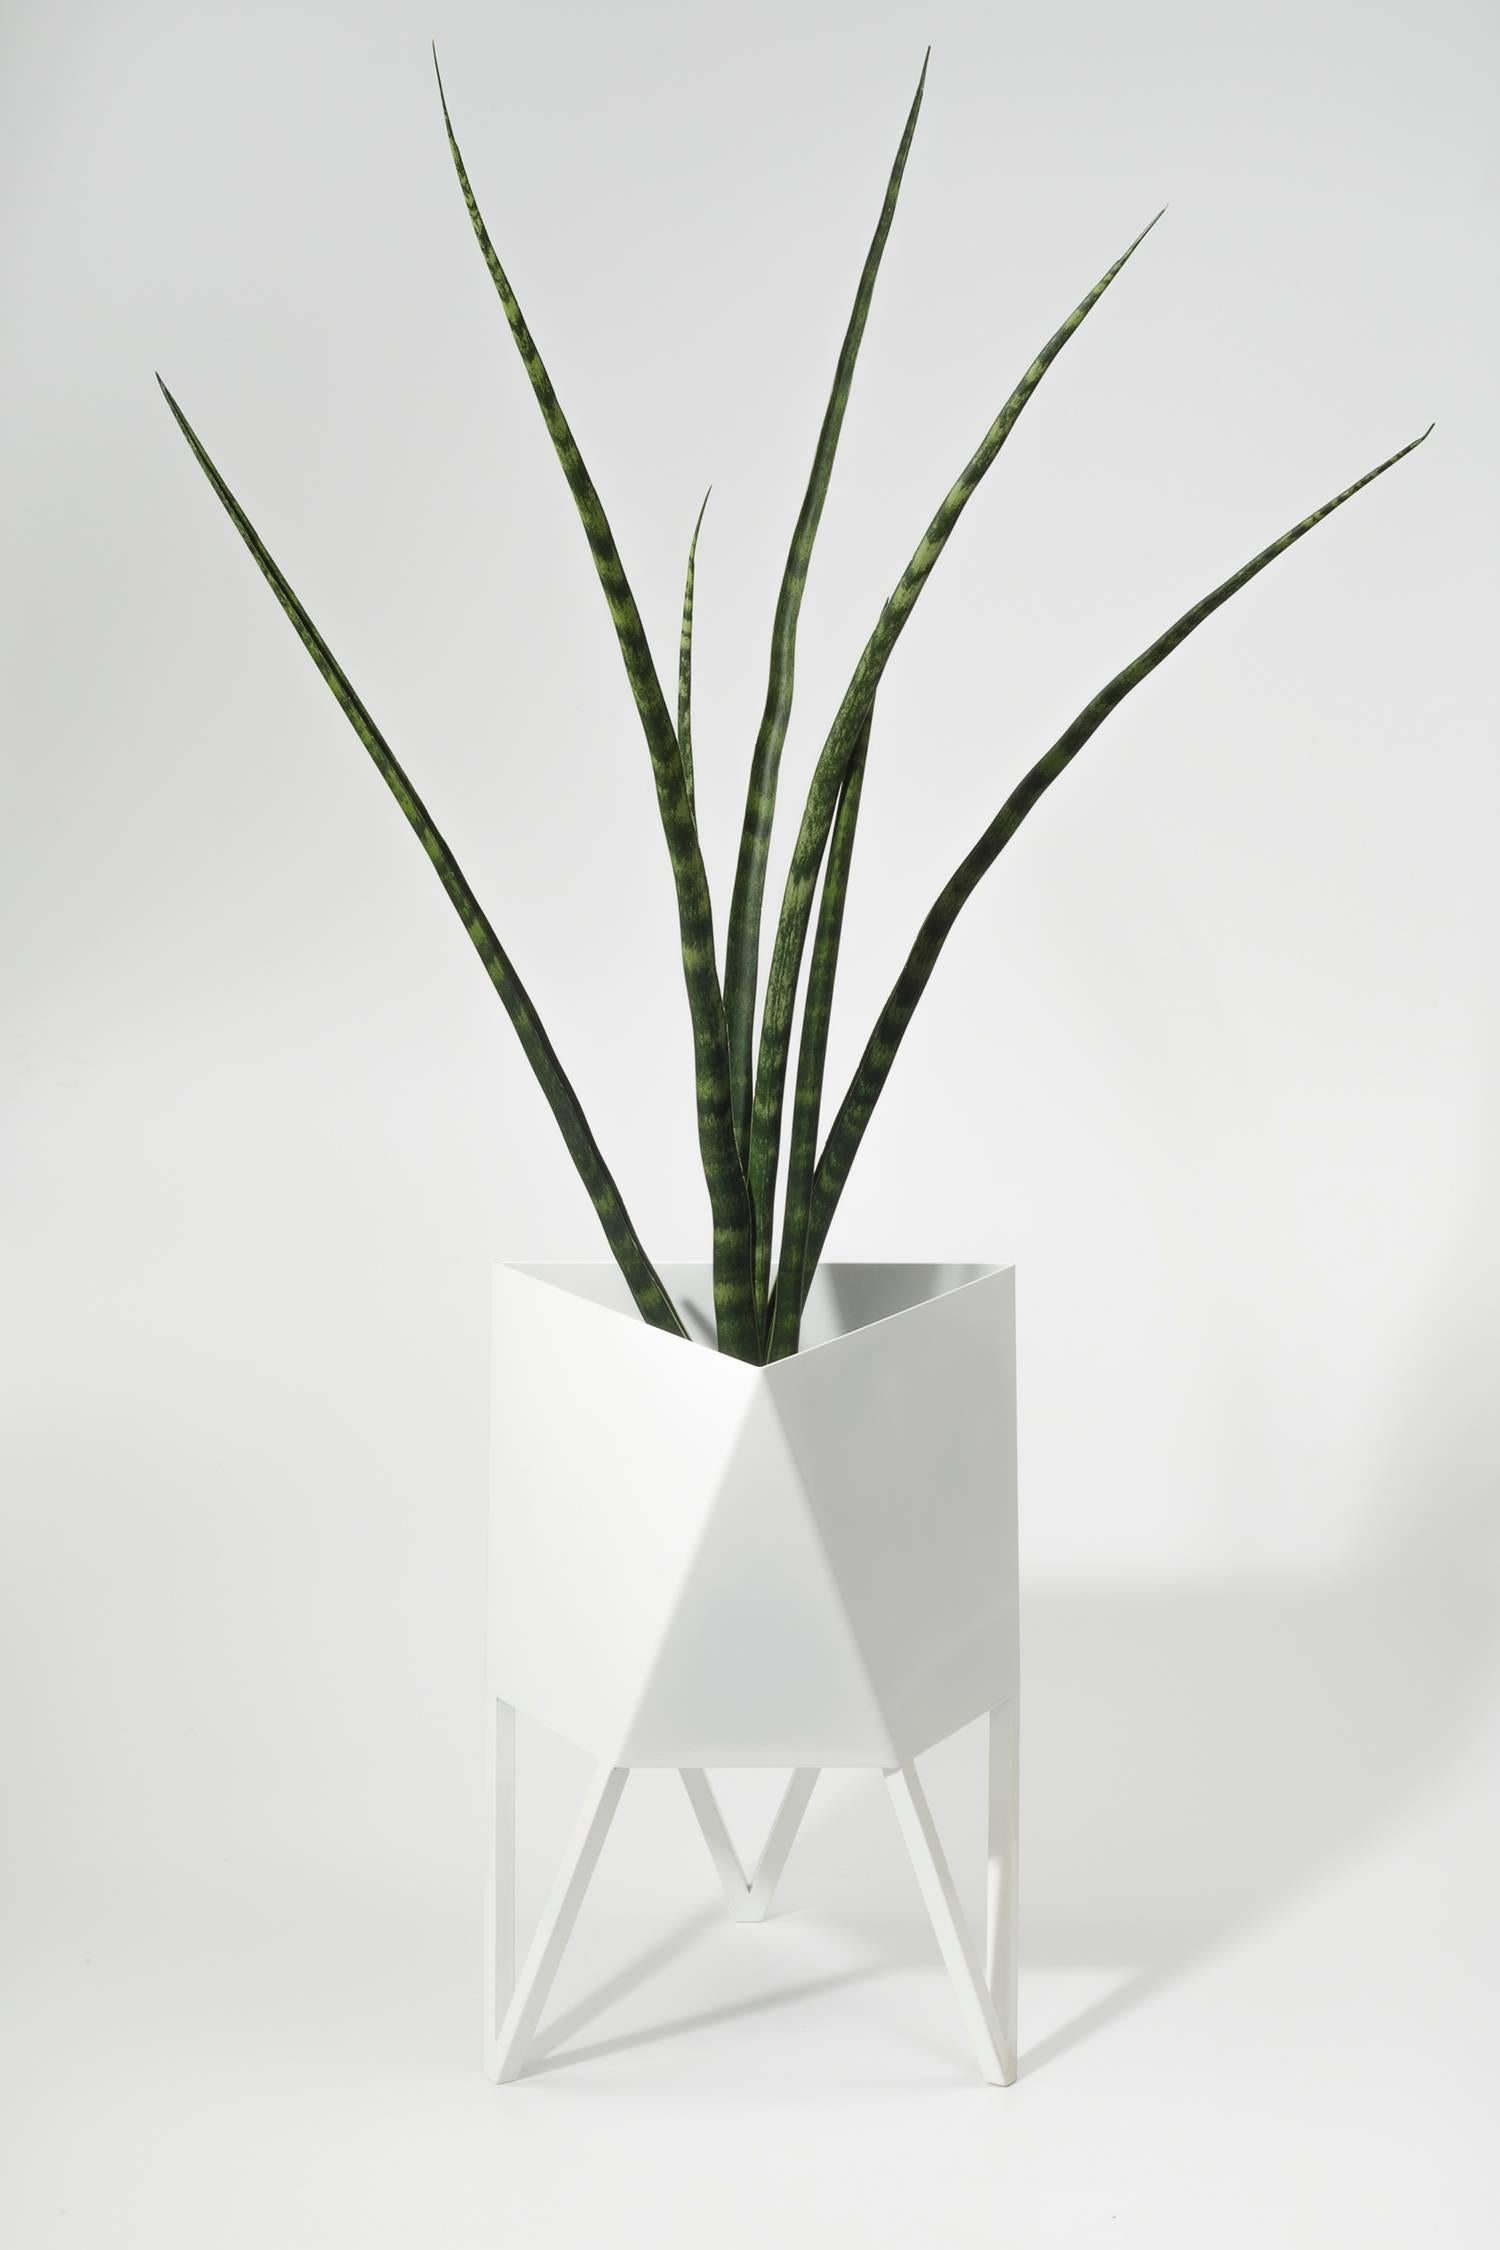 Small Deca Planter in Mint by Force/Collide, 2020 8